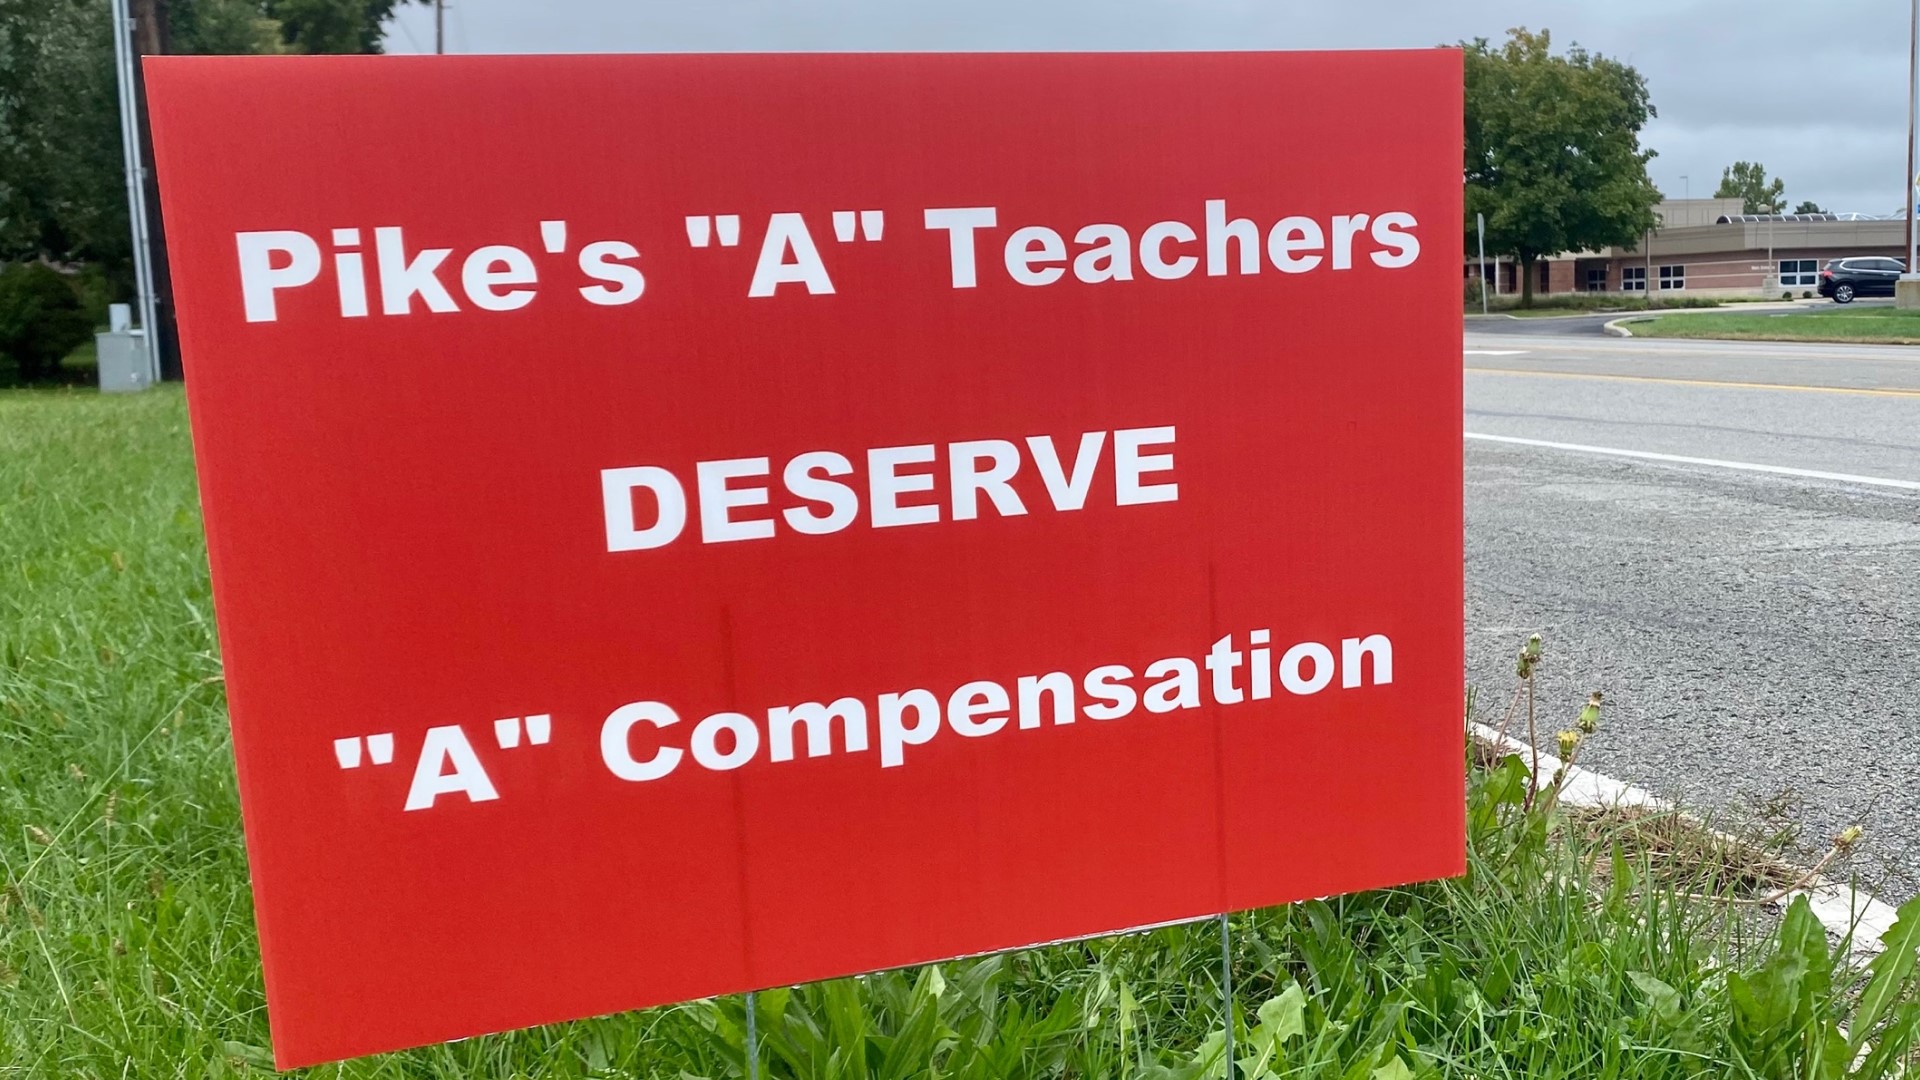 This comes after last week's school board meeting where nearly 100 teachers and bus drivers protested and called for better compensation.